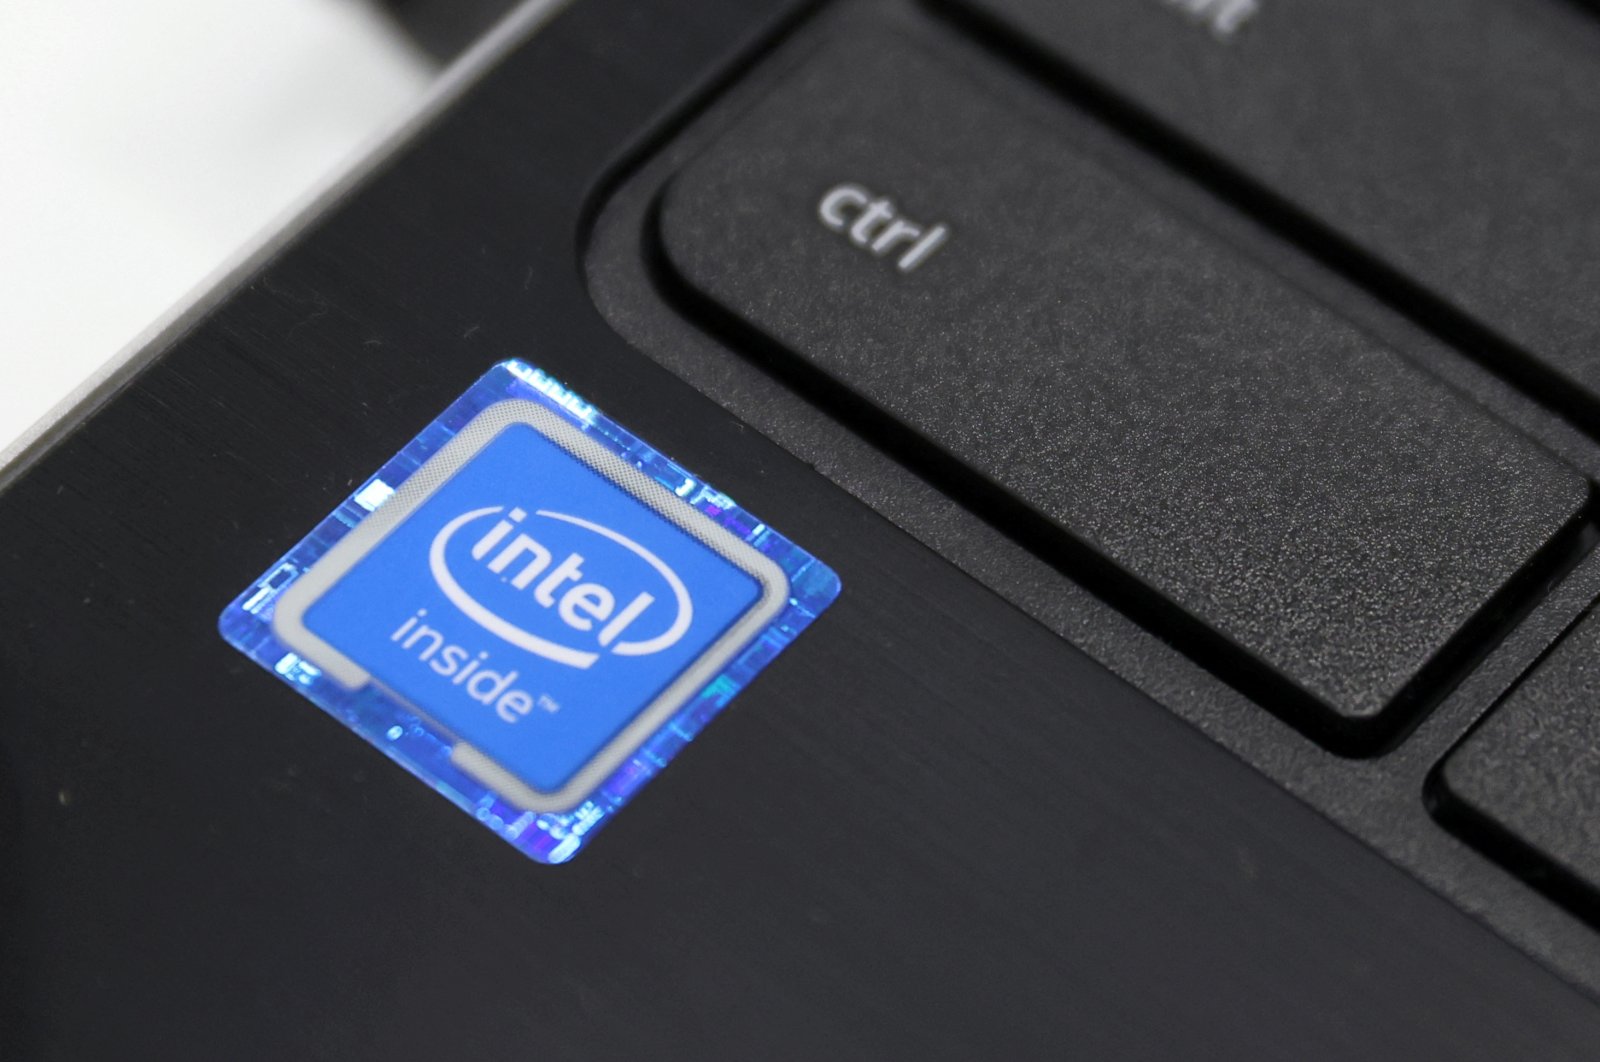 The Intel logo is seen on a sticker on a laptop for sale in Queens, New York, U.S., Nov. 16, 2021. (Reuters Photo)